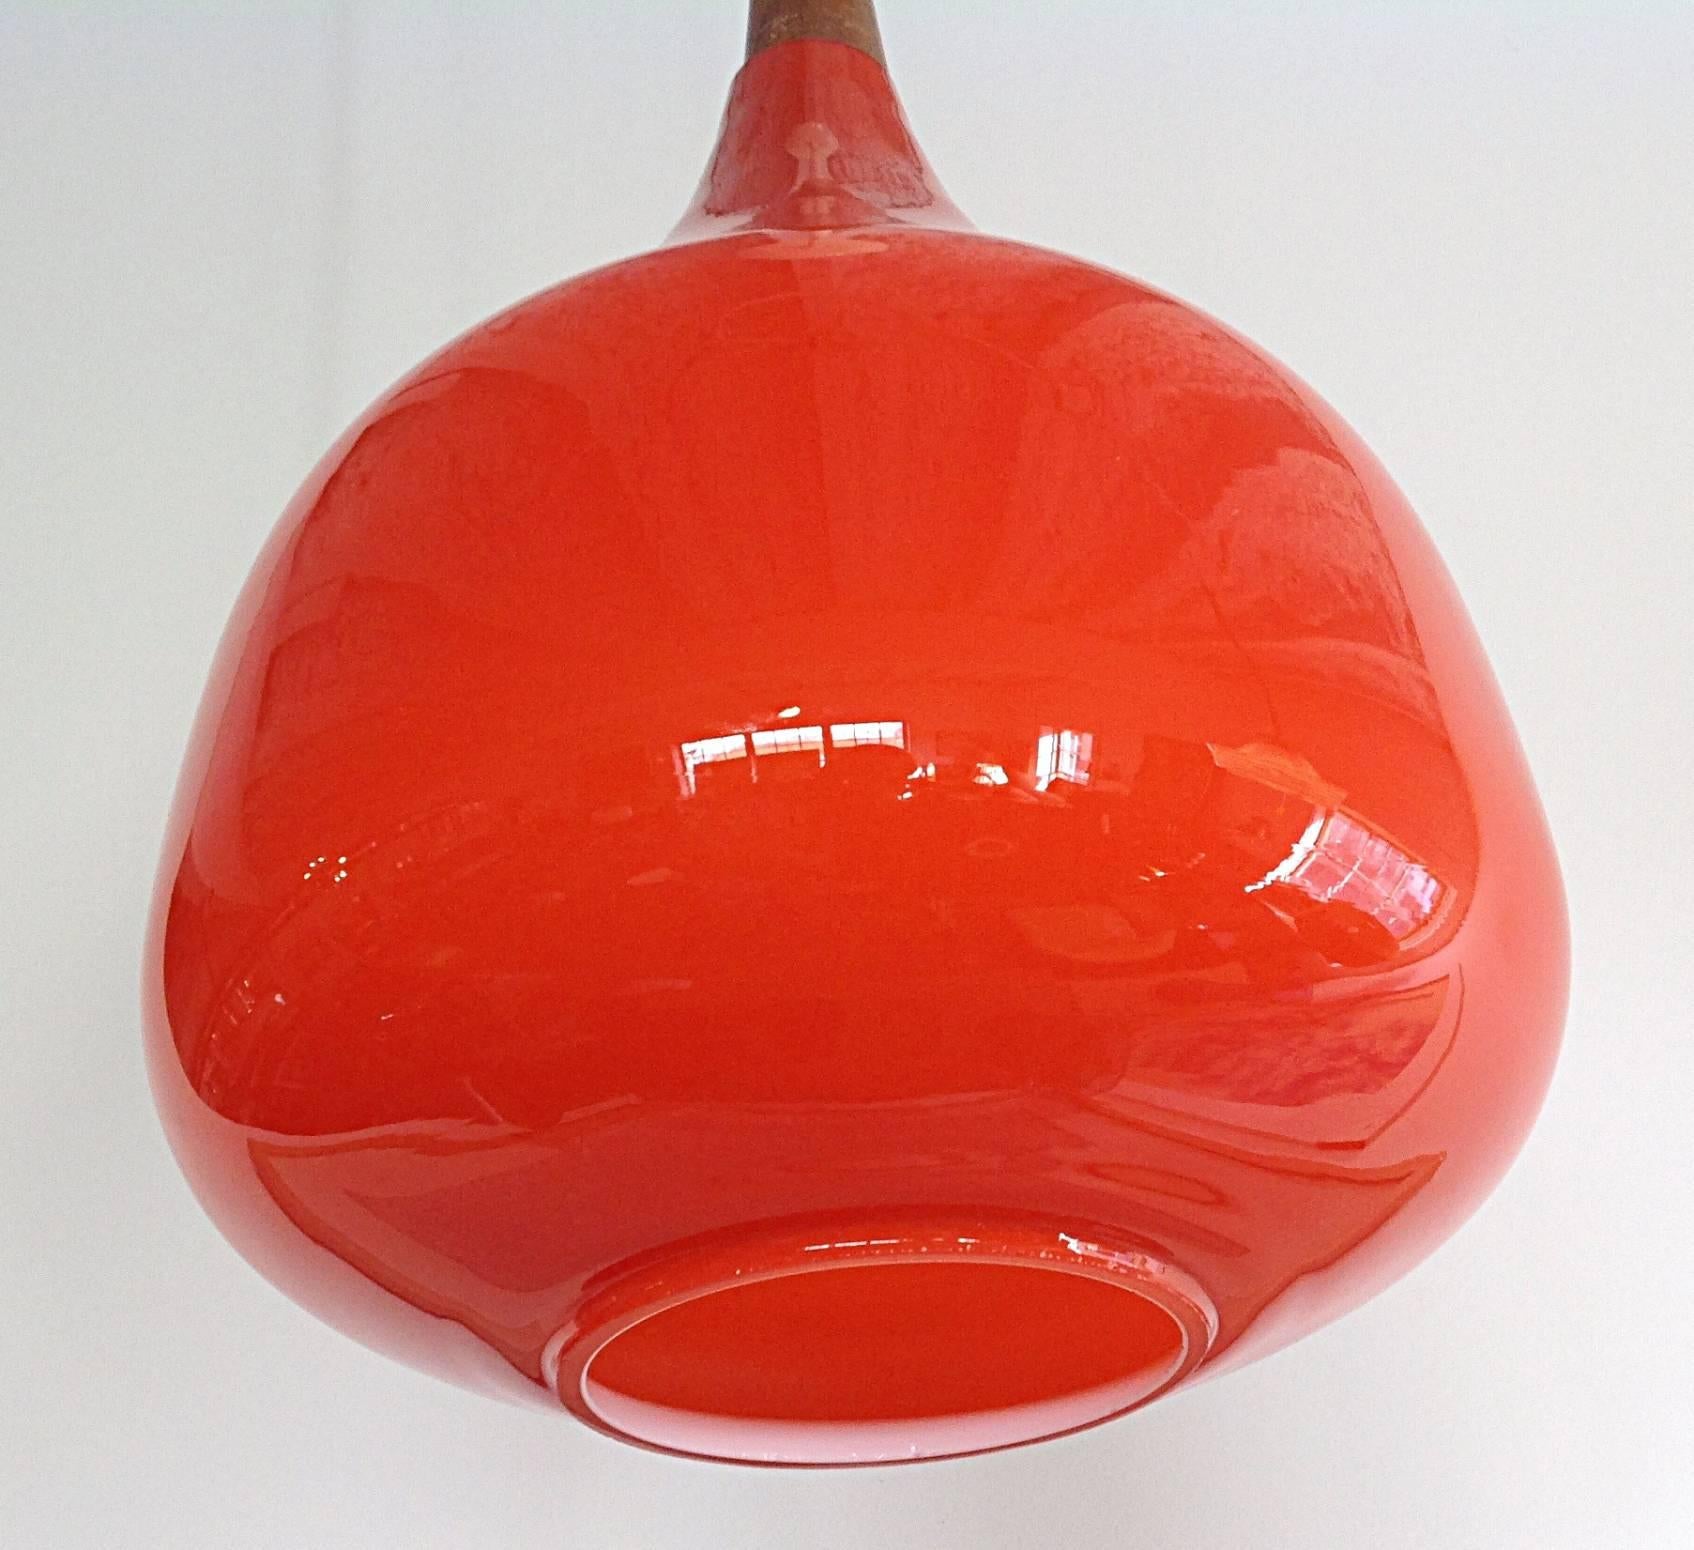 Rich tomato color cased glass, onion shaped pendants by Luxus. Each glass pendant is topped with a wooden conical finial which the cord travels through. Retains original white ceiling caps. Overall drop is approximately 36